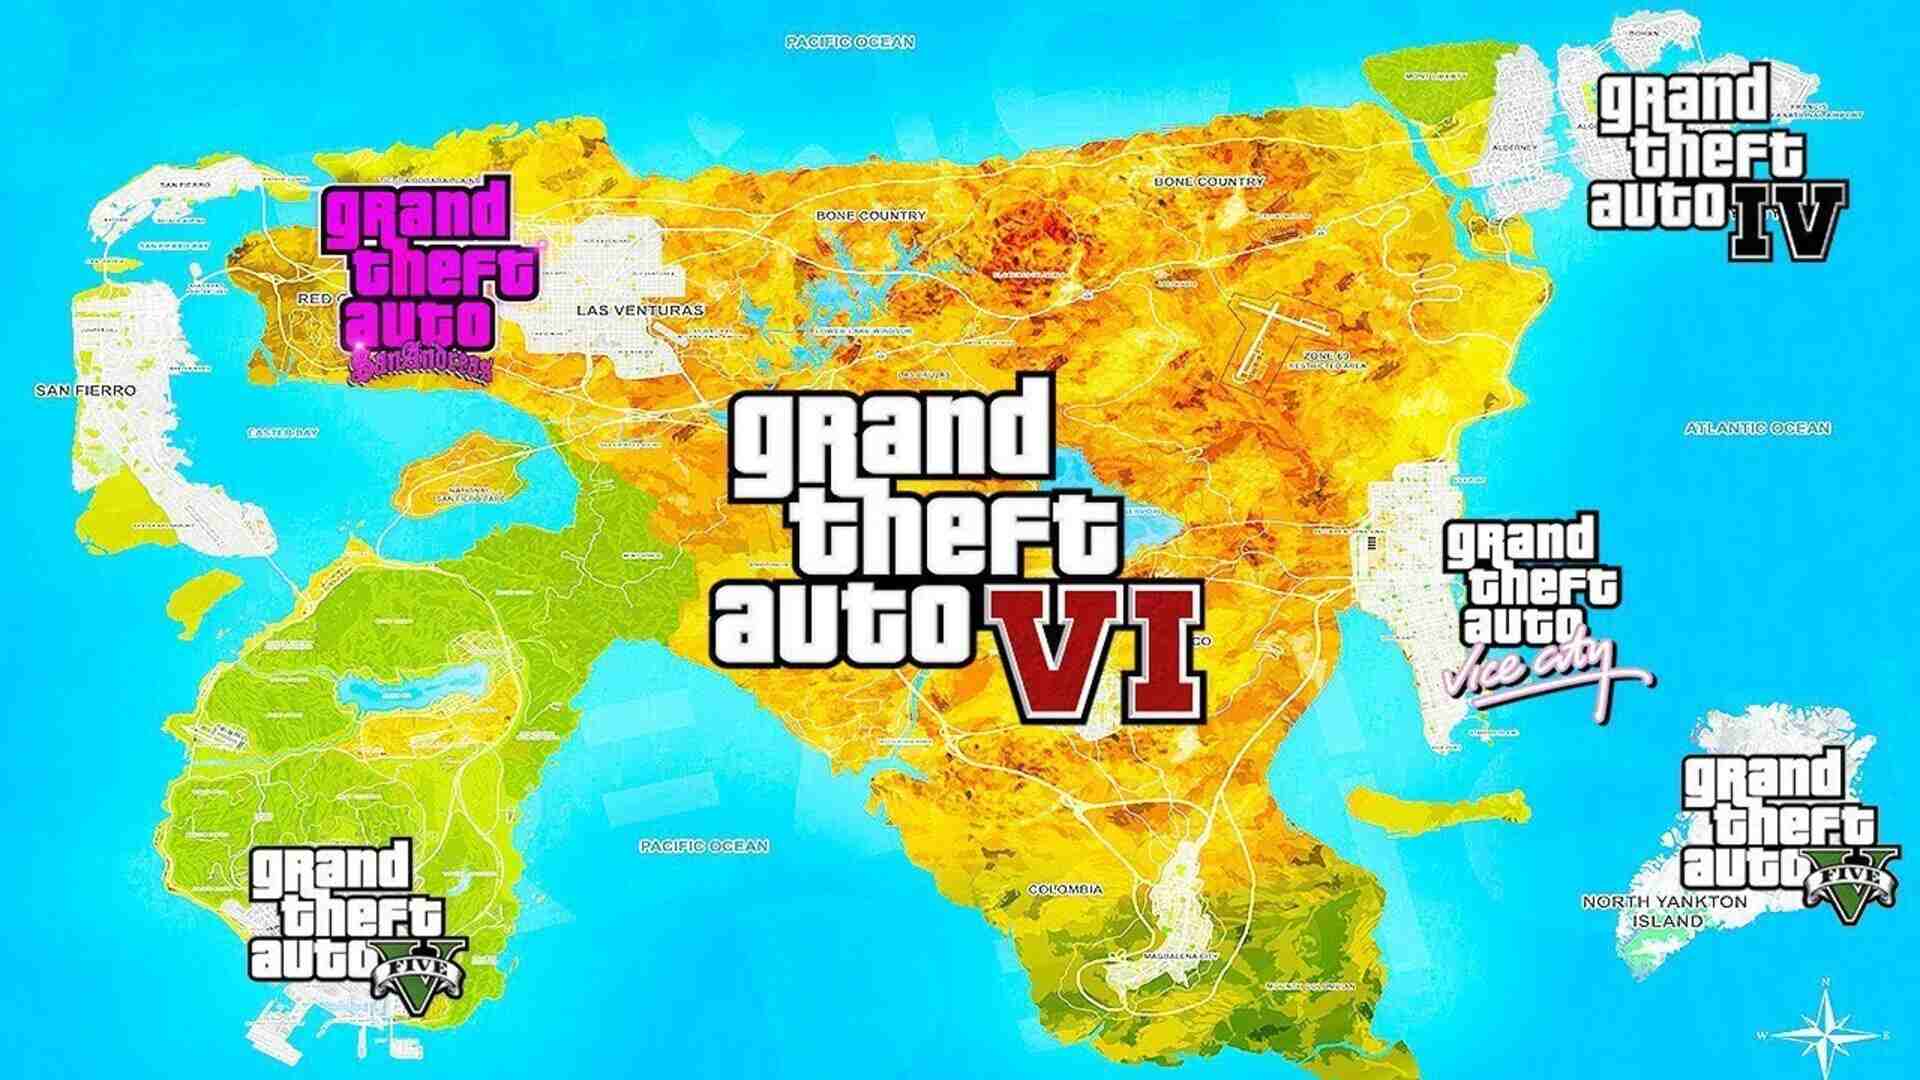 GTA 6 map leaked: This is what leakers say the new game's setting